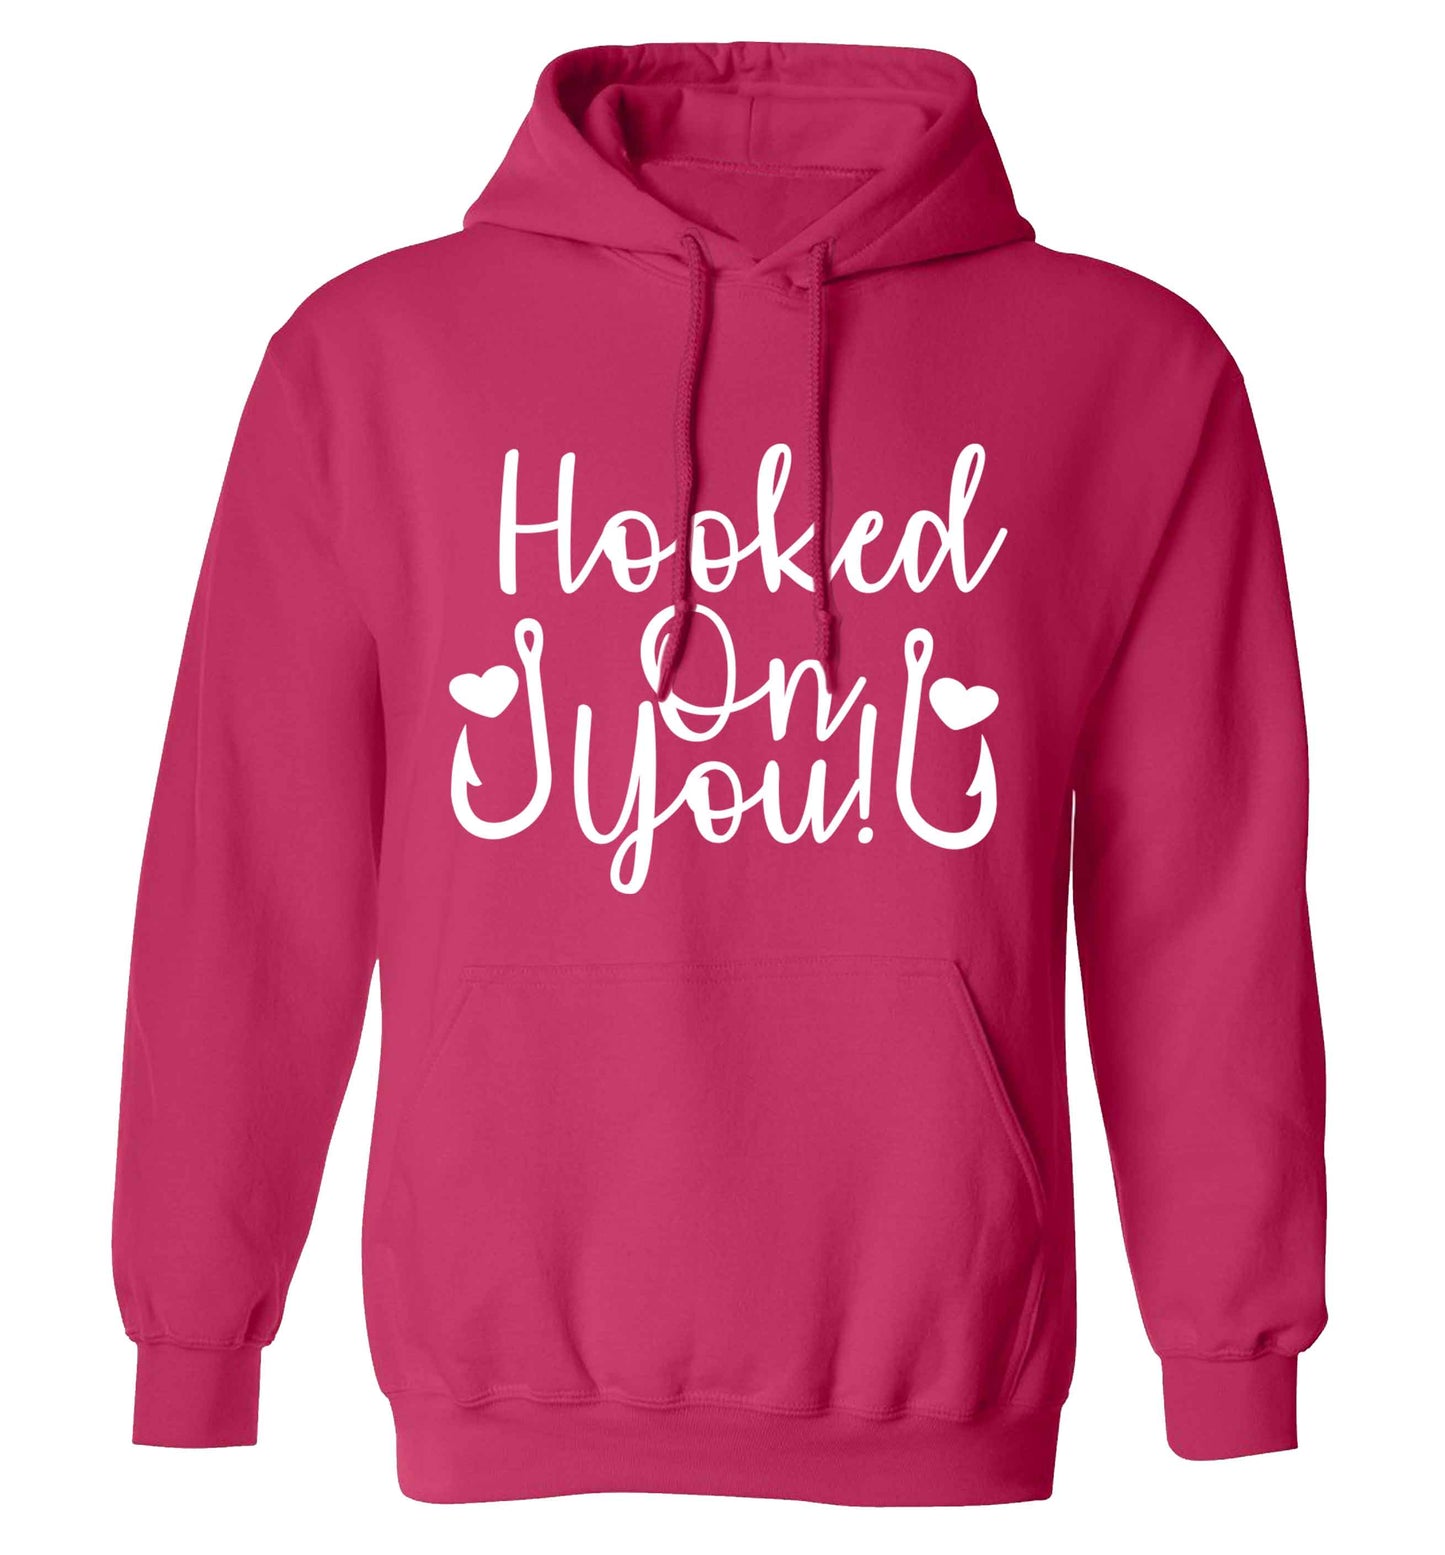 Hooked on you adults unisex pink hoodie 2XL